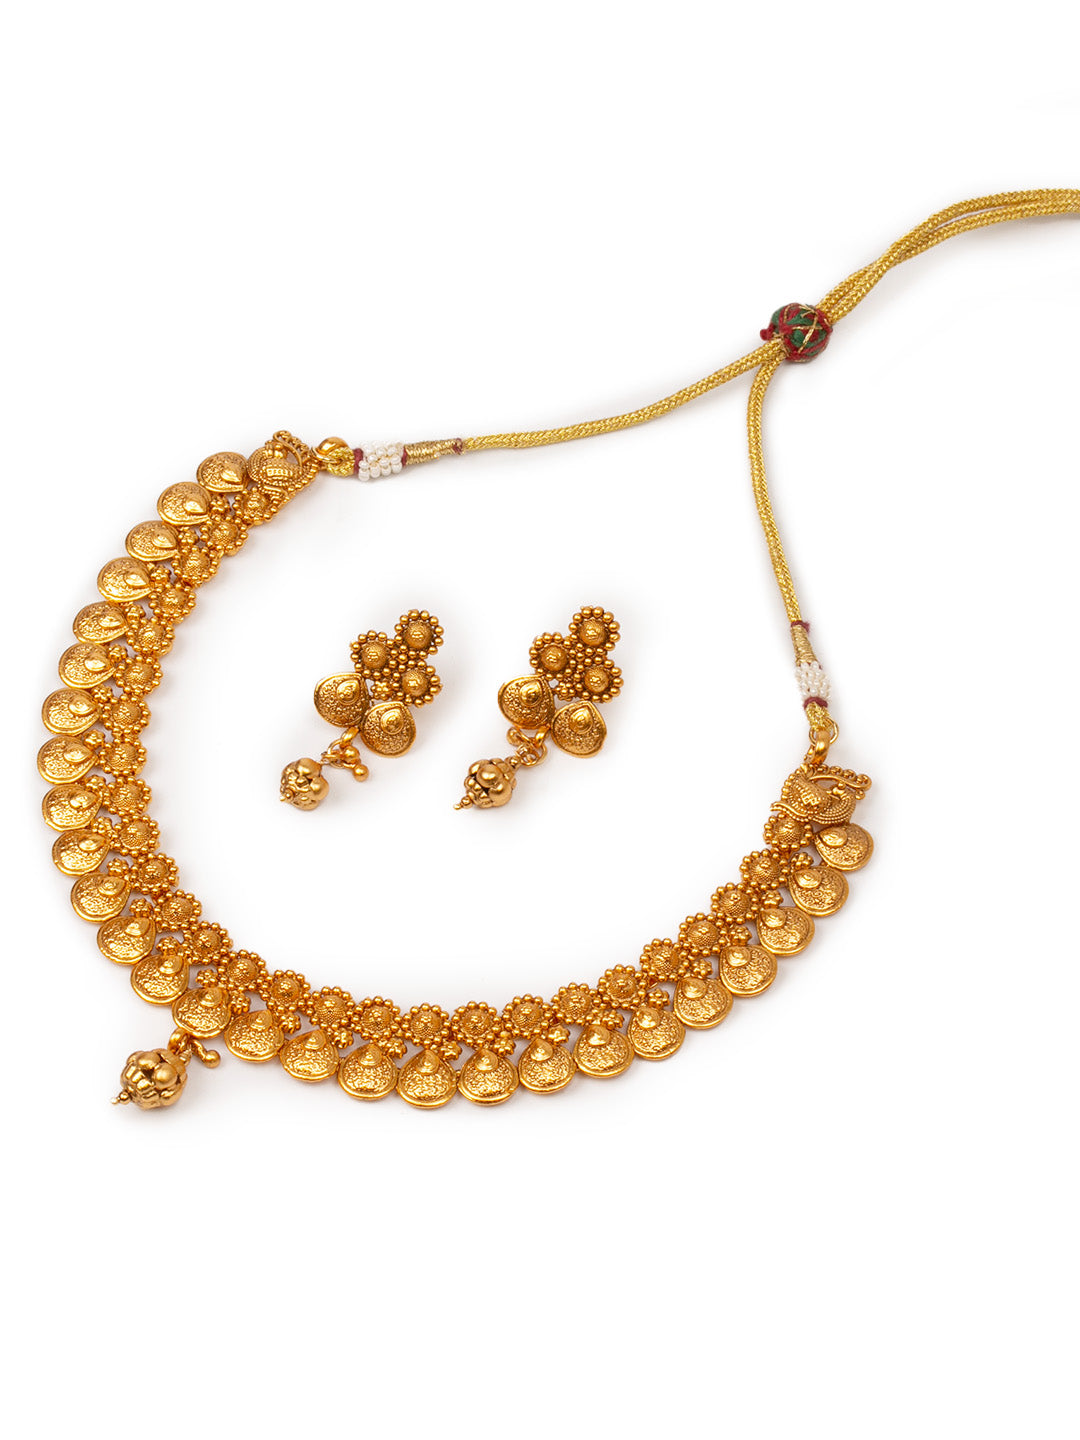 Antique Golden Necklace Set With Earrings